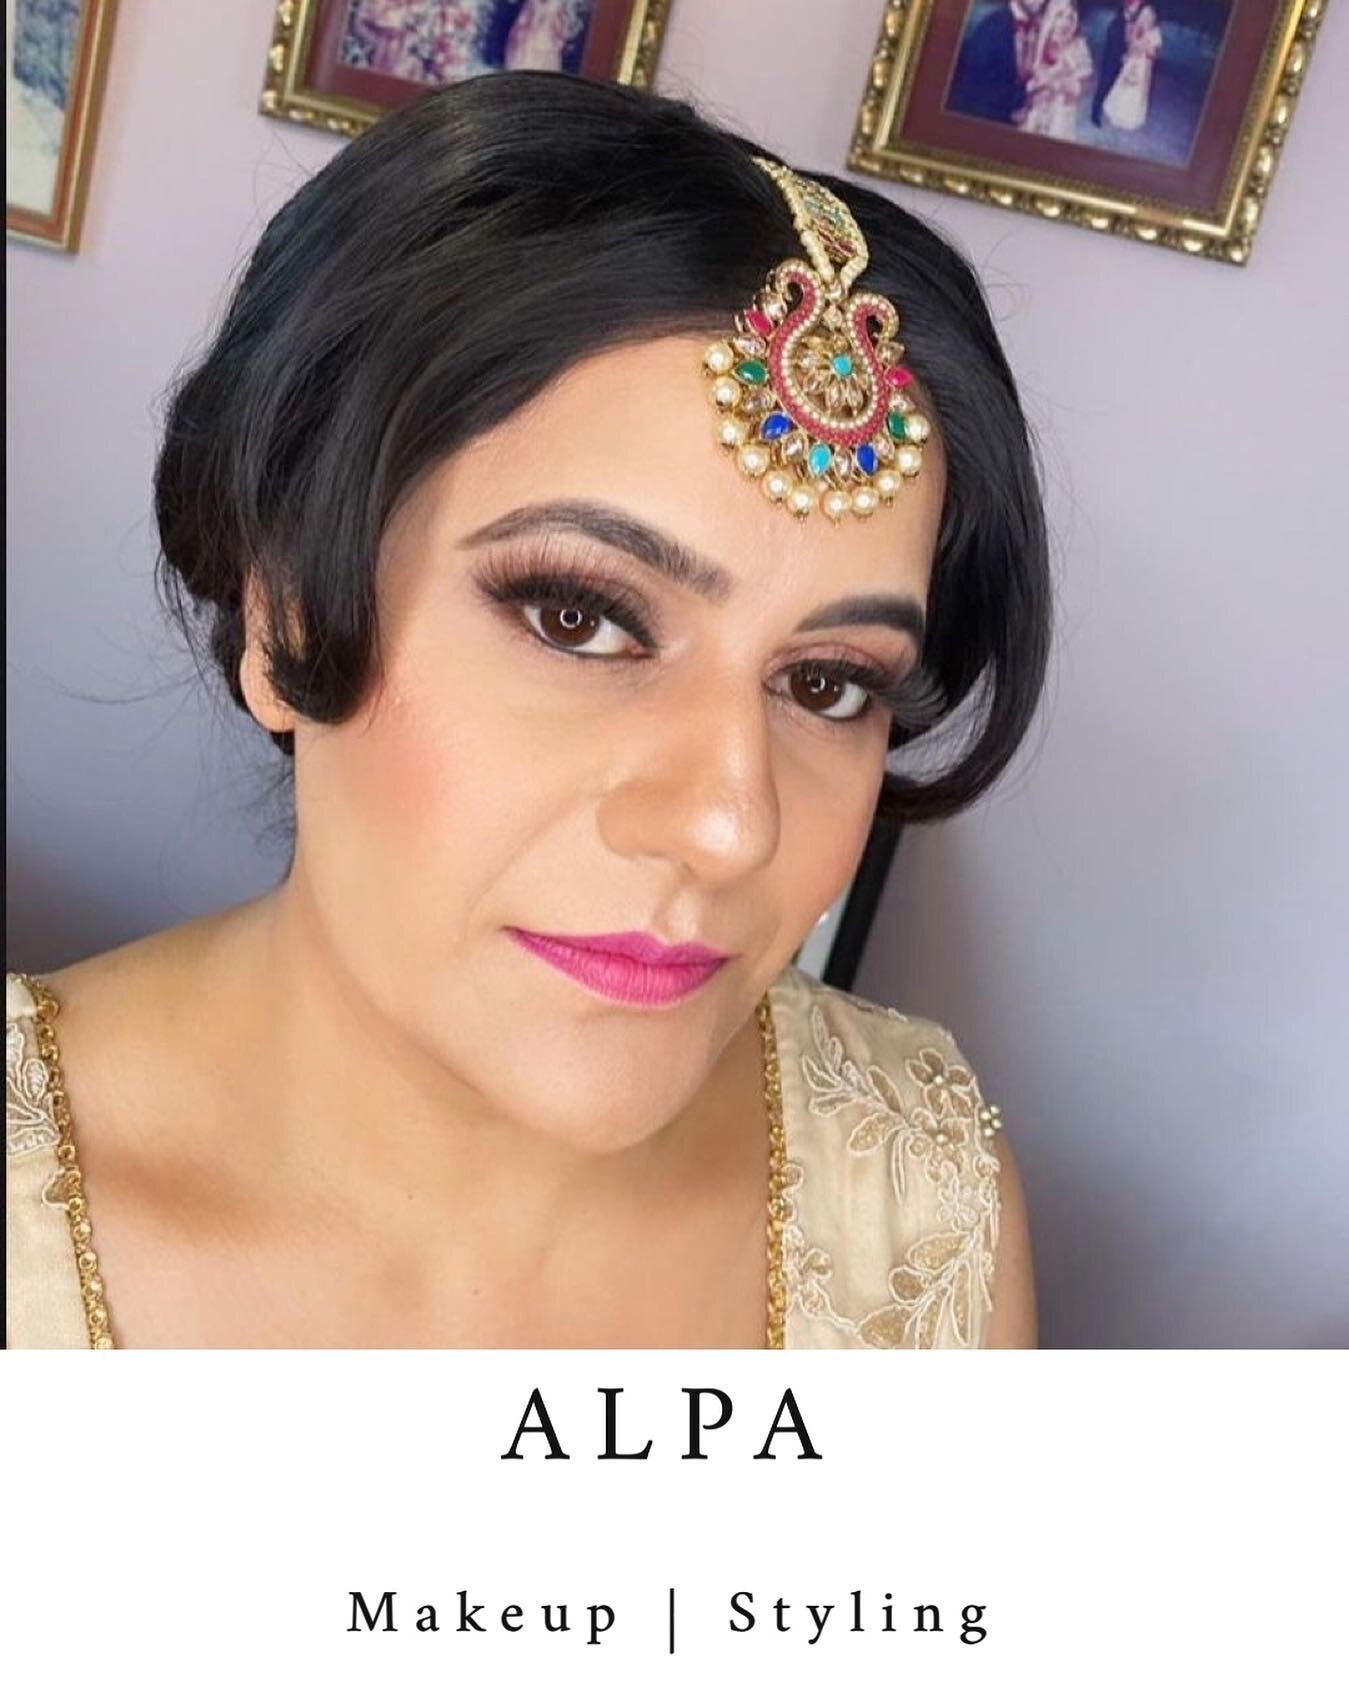 💄MUA: ALPA
📍Location: LEICESTER - available to travel ----------------------------------------------------------------------------------
To BOOK 👉🏽 Email us at promakeuplondonstylists@gmail.com ----------------------------------------------------